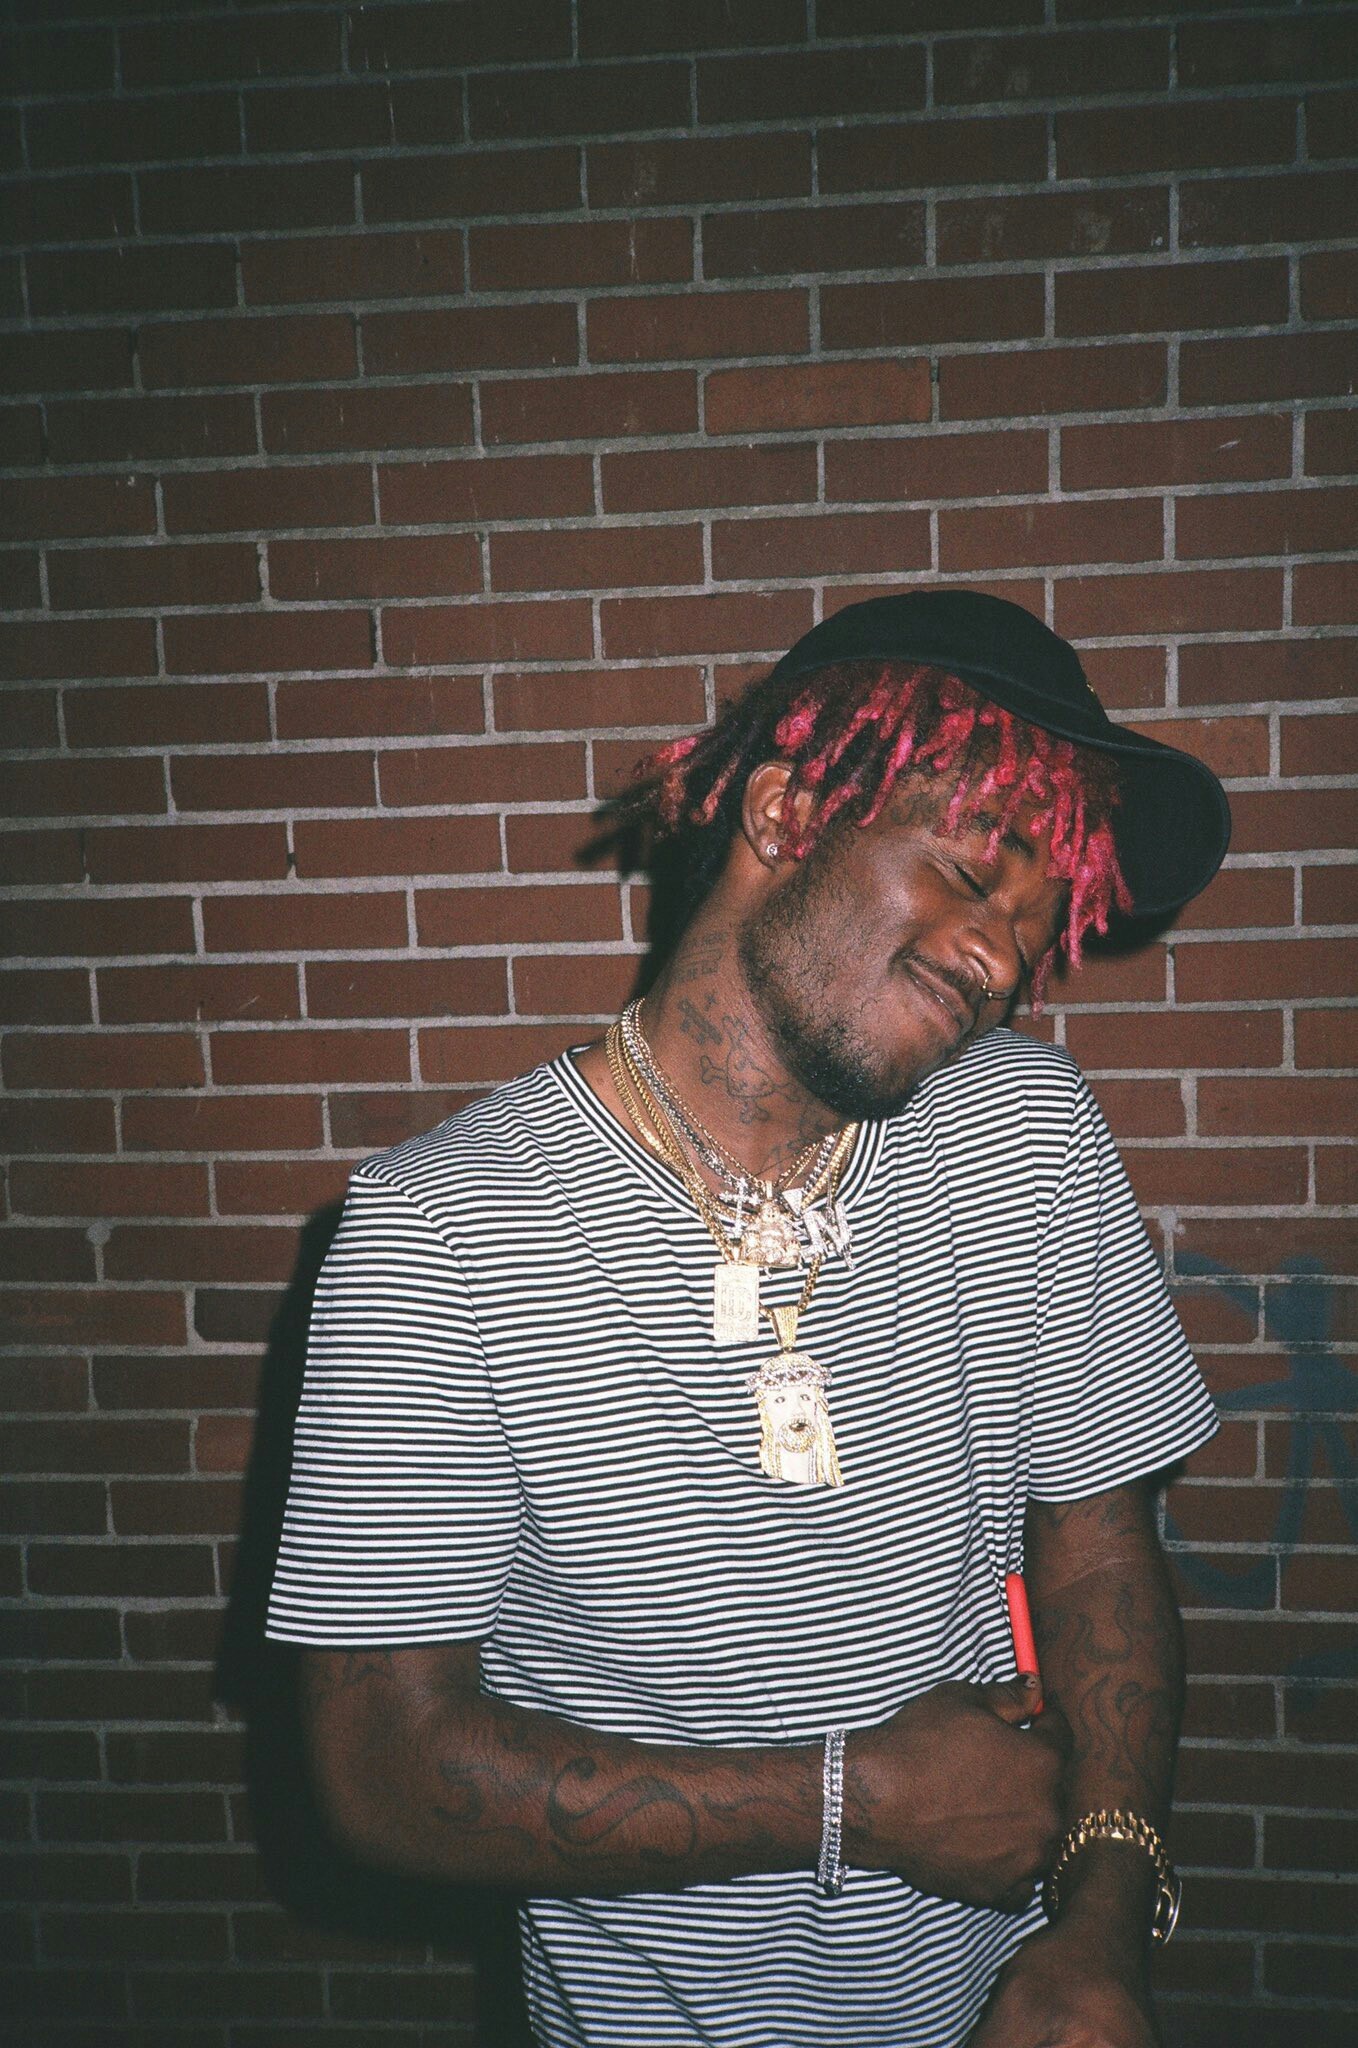 1358x2048 While I love lil uzi vert and his hair I chose this photo because it shows